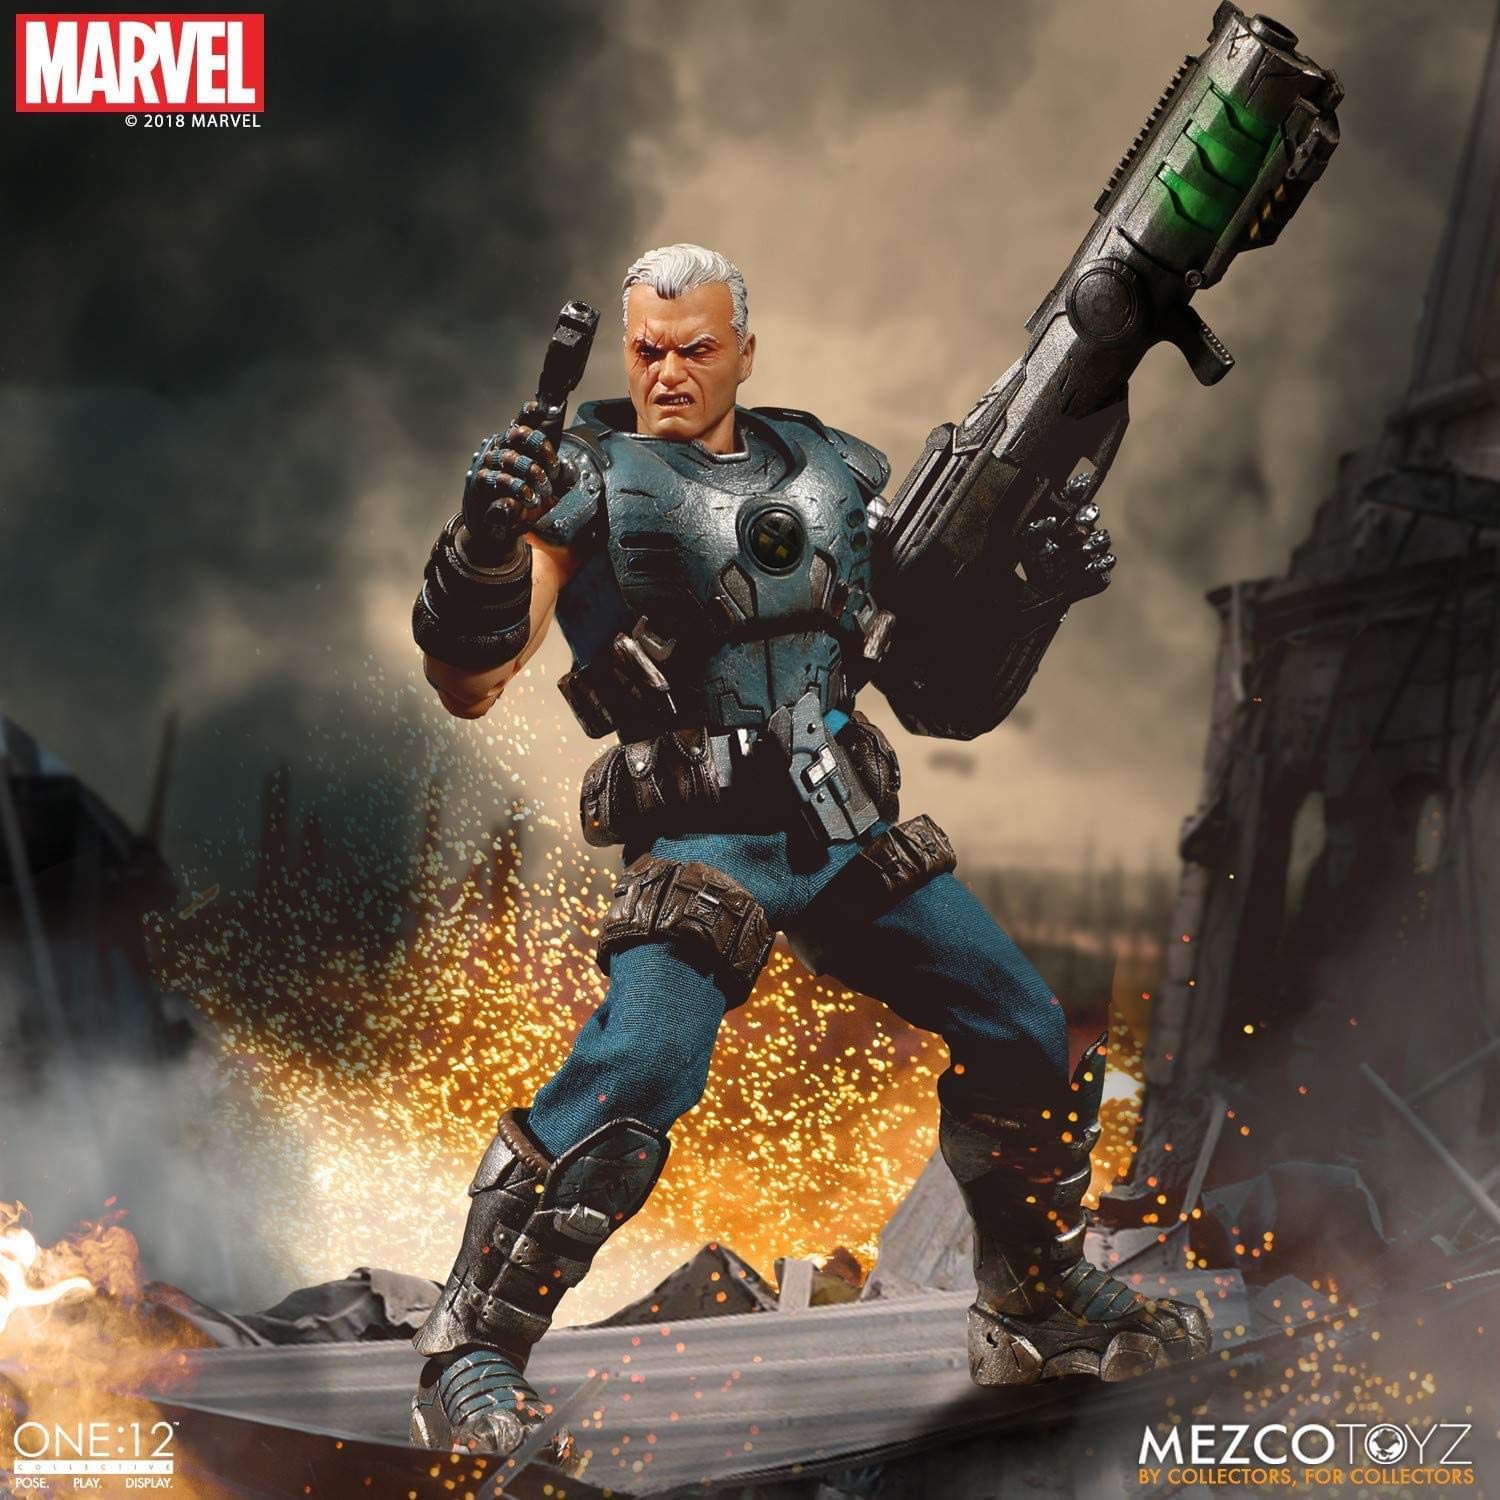 Cable By Mezco